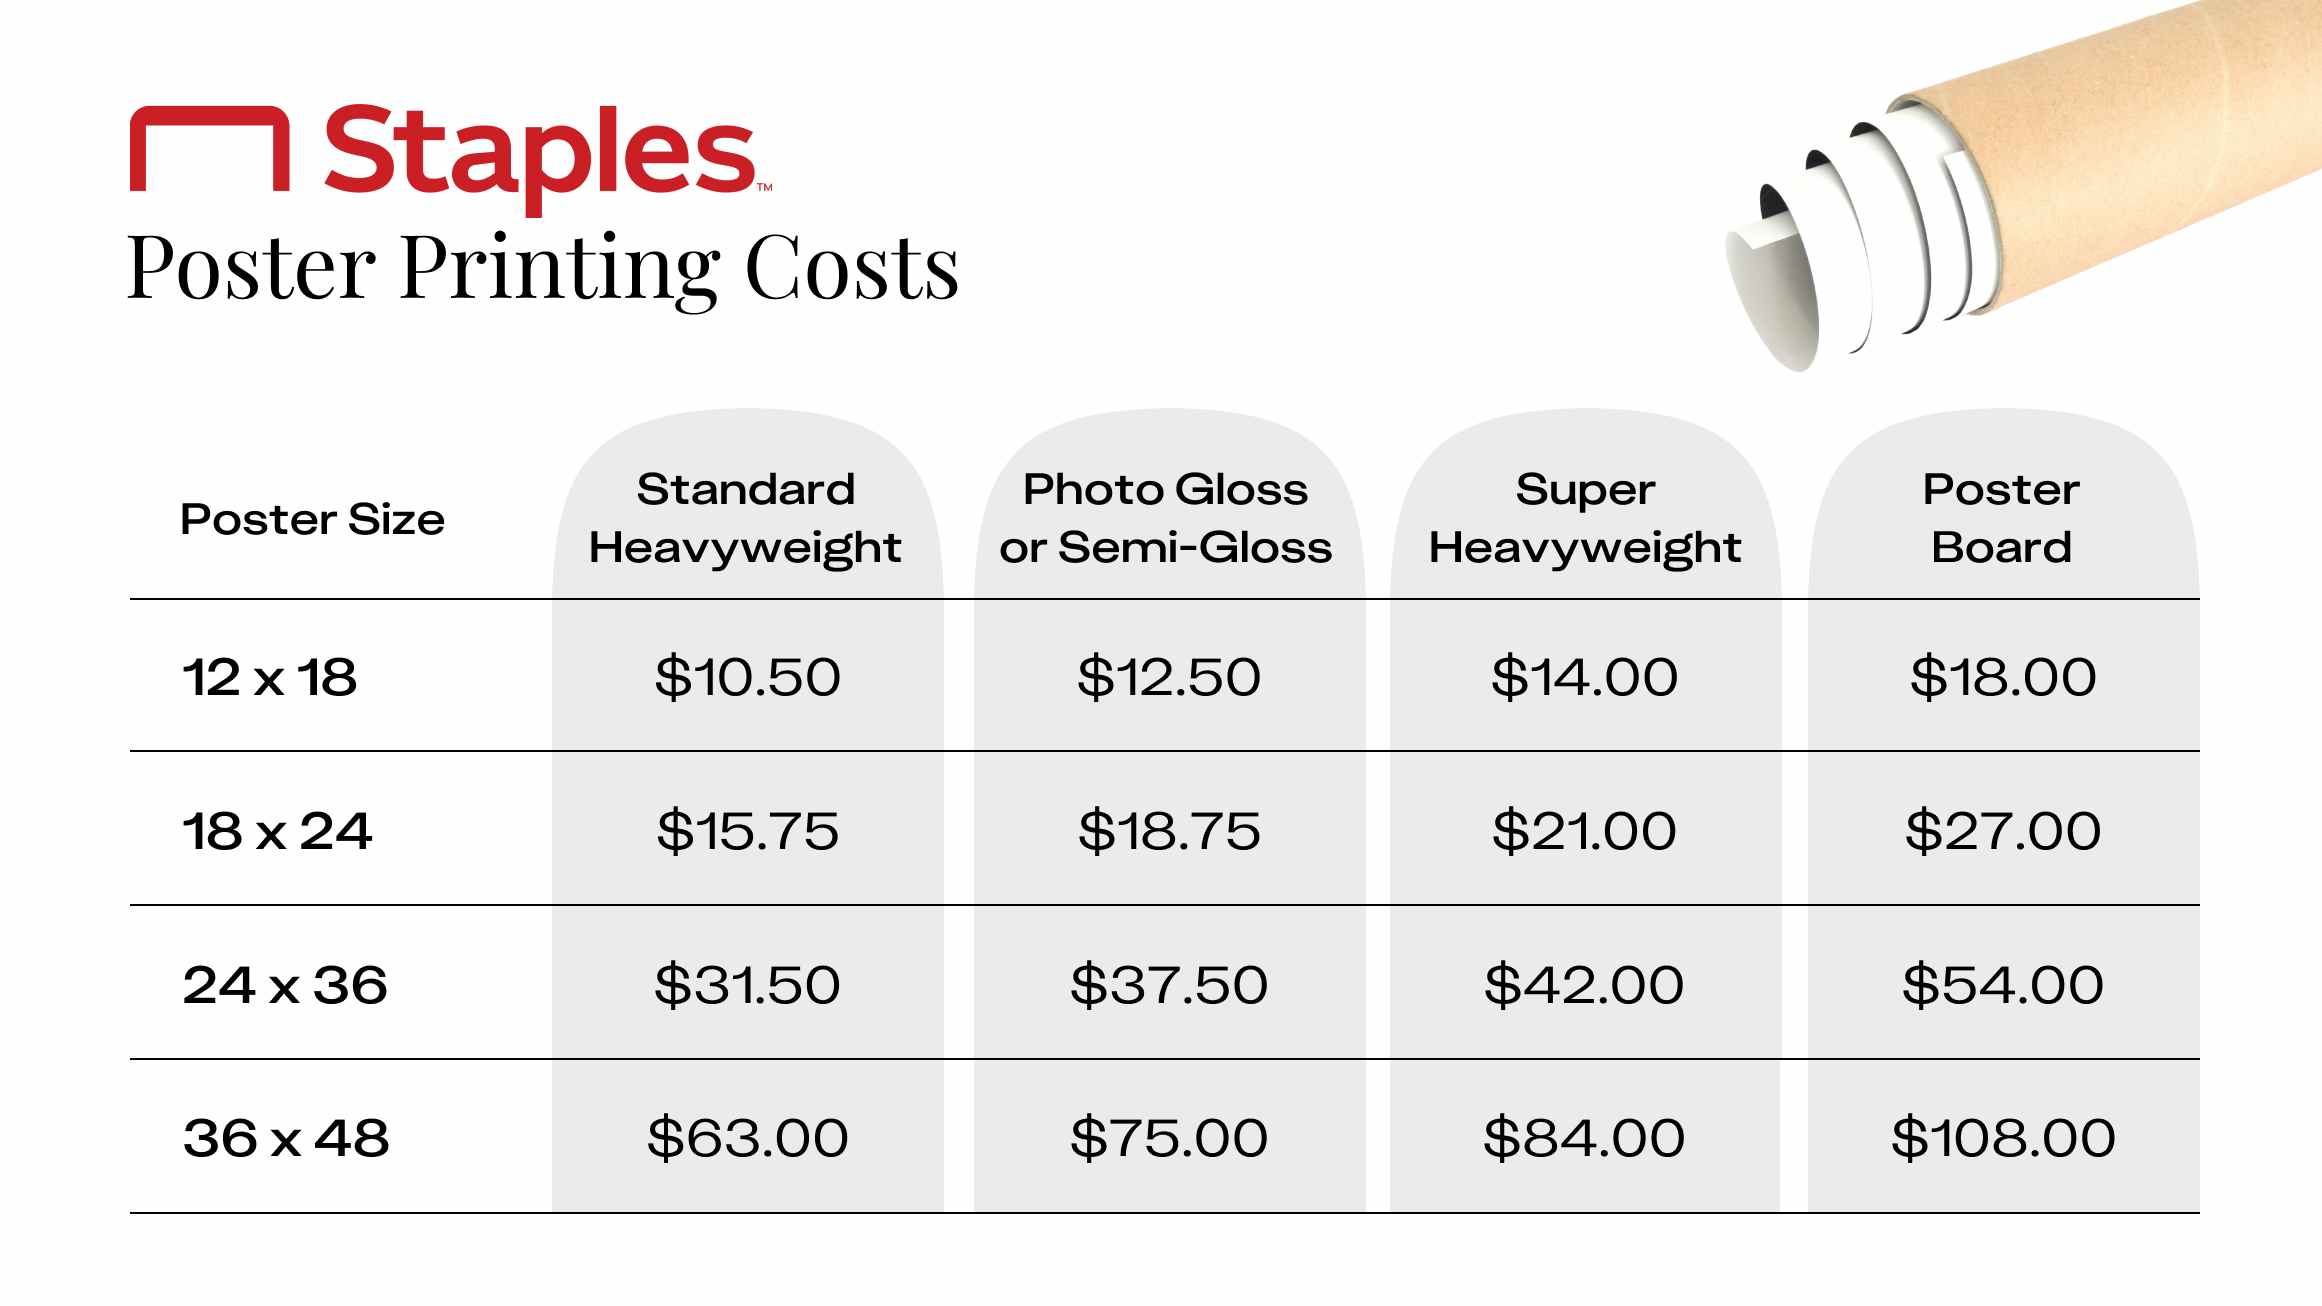 A table graphic showing the different costs for Posters at Staples that reads, "Staples Poster Printing Costs Poster Size Standard Heavyweight Photo Gloss or Semi-Gloss Super Heavyweight Poster Board 12 x 18 $10.50 $12.50 $14.00 $18.00 18 x 24 $15.75 $18.75 $21.00 $27.00 24 x 36 $31.50 $37.50 $42.00 $54.00 36 x 48 $63.00 $75.00 $84.00 $108.00